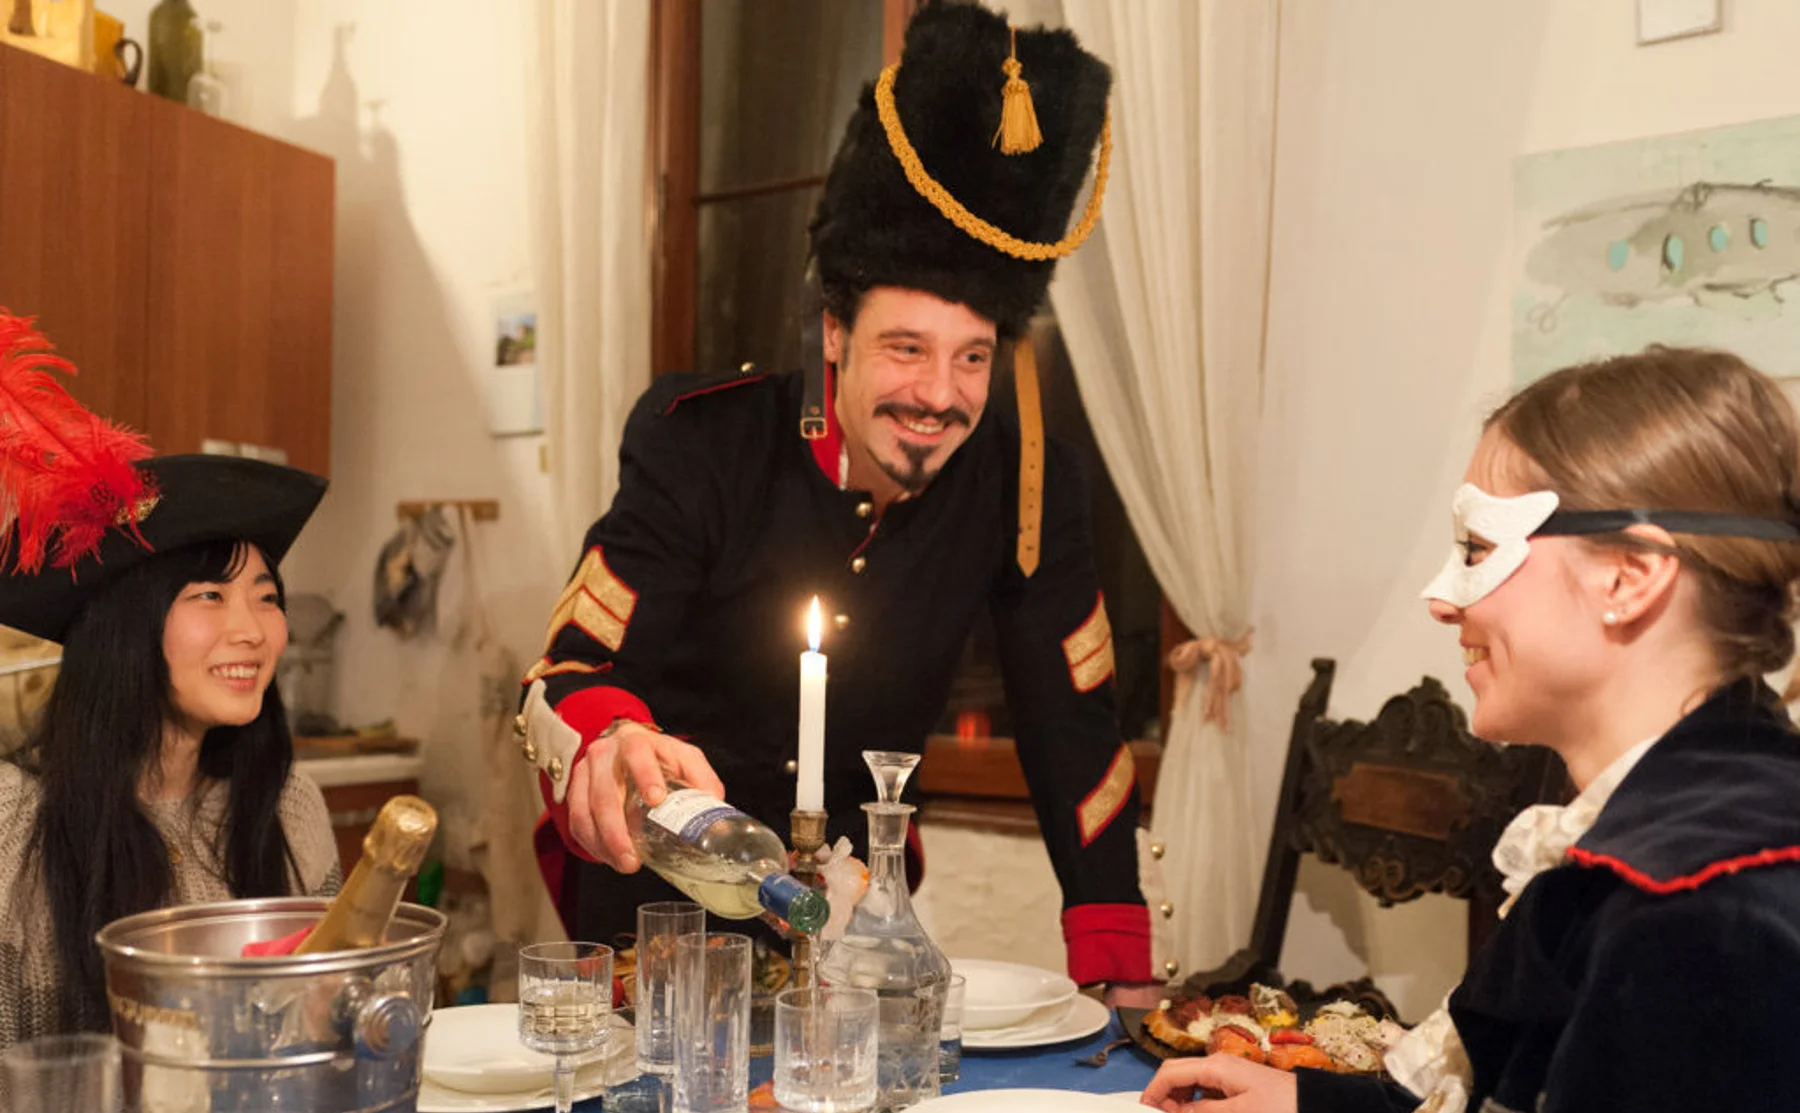 Carnival dinner in Venice with a local sailor - 1149449